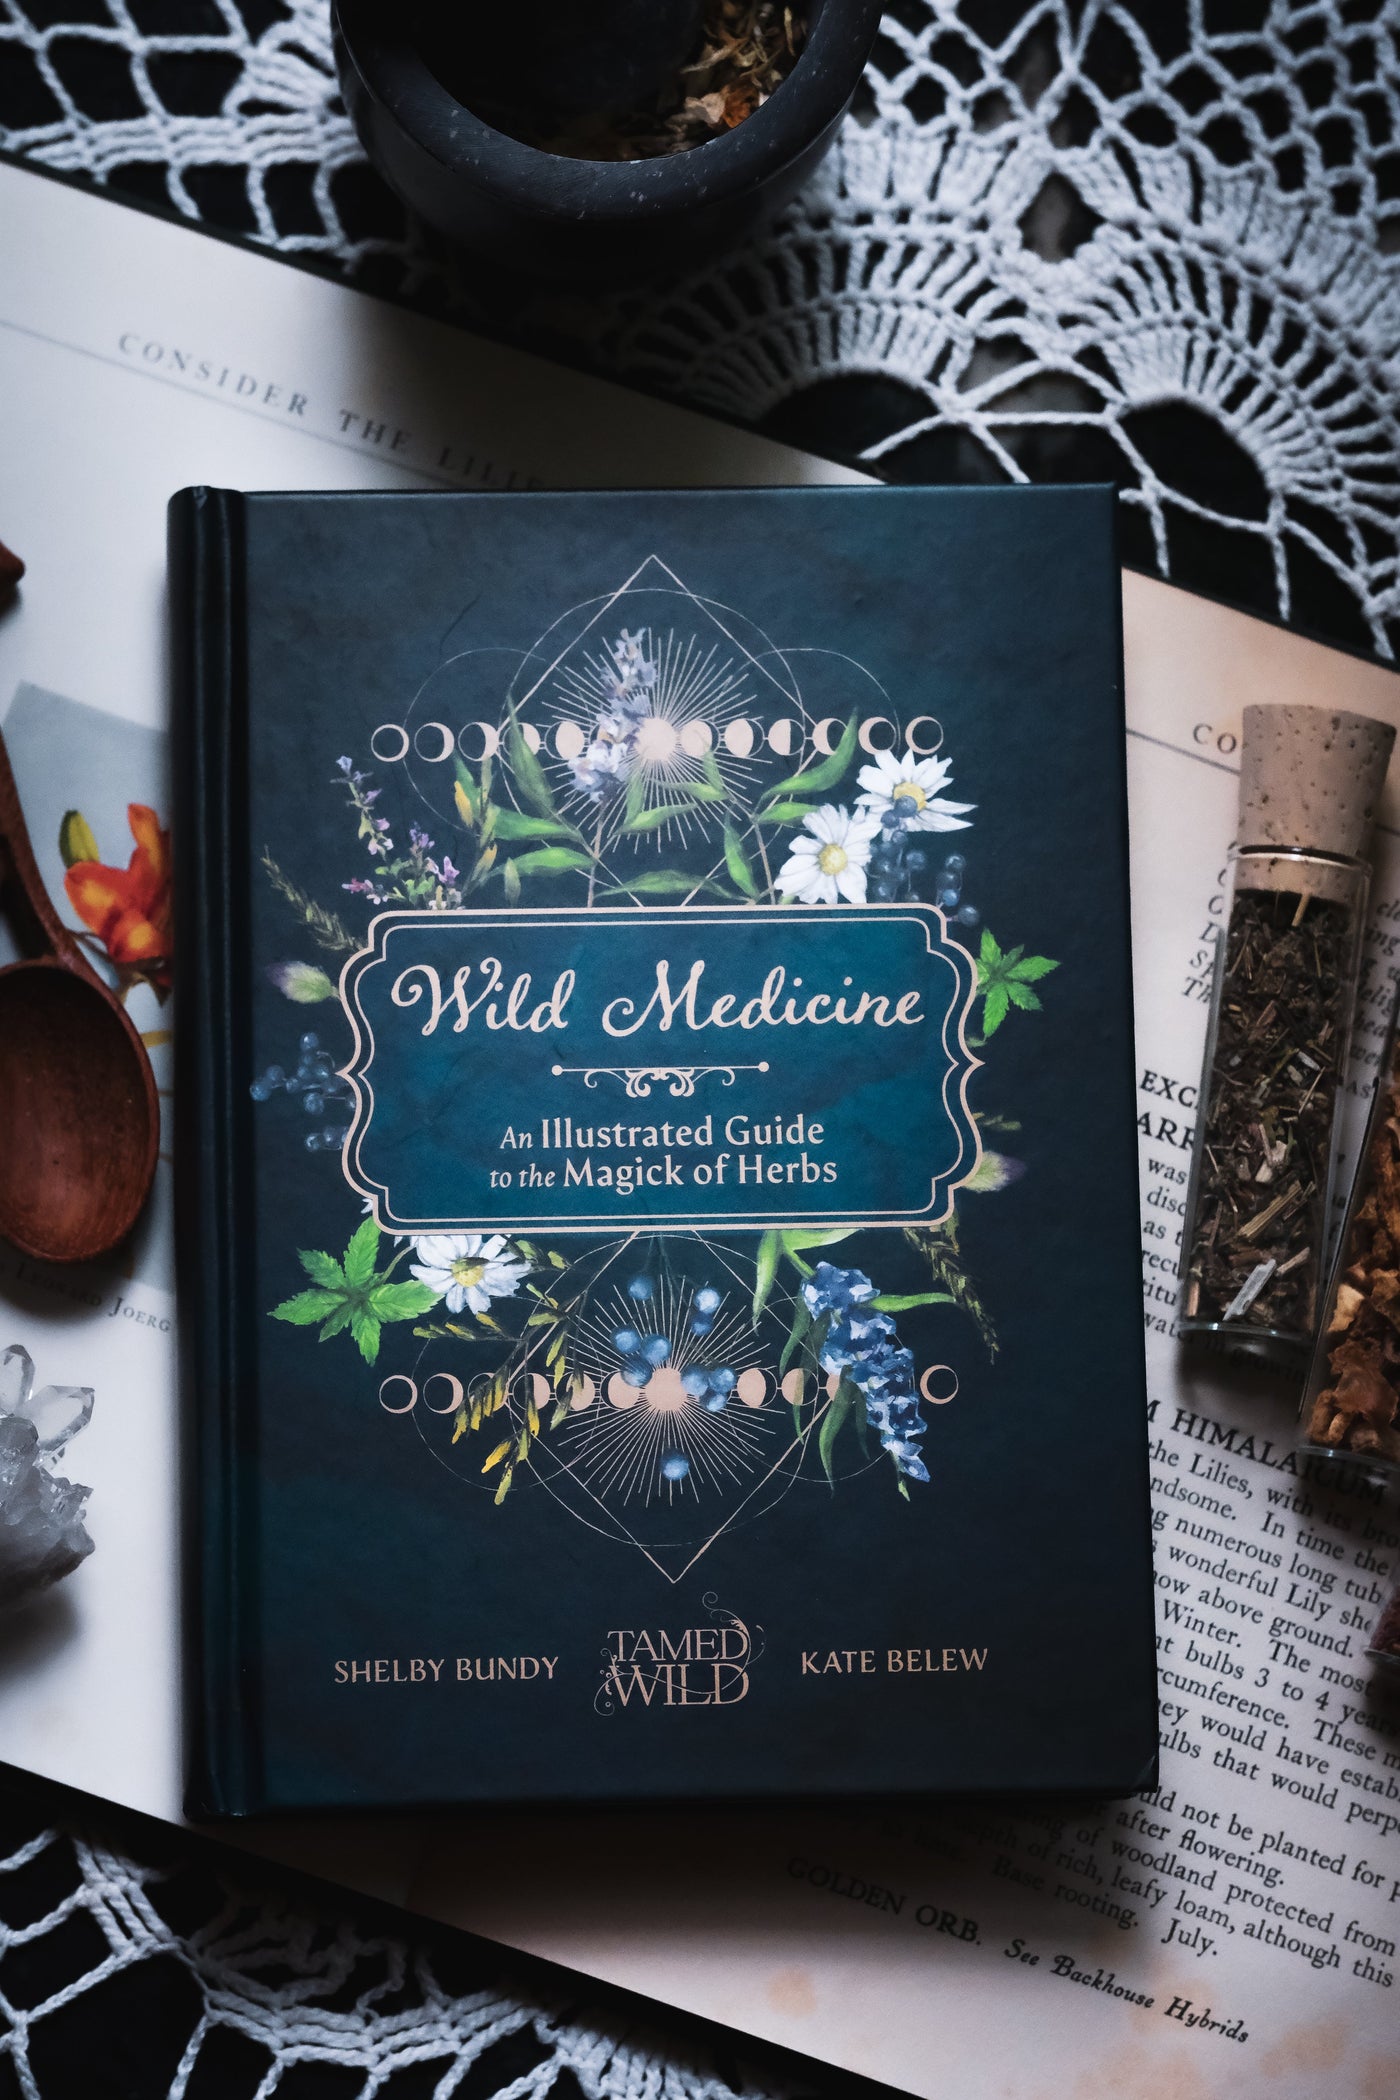 Wild Medicine: Tamed Wild's Illustrated Guide to the Magick of Herbs